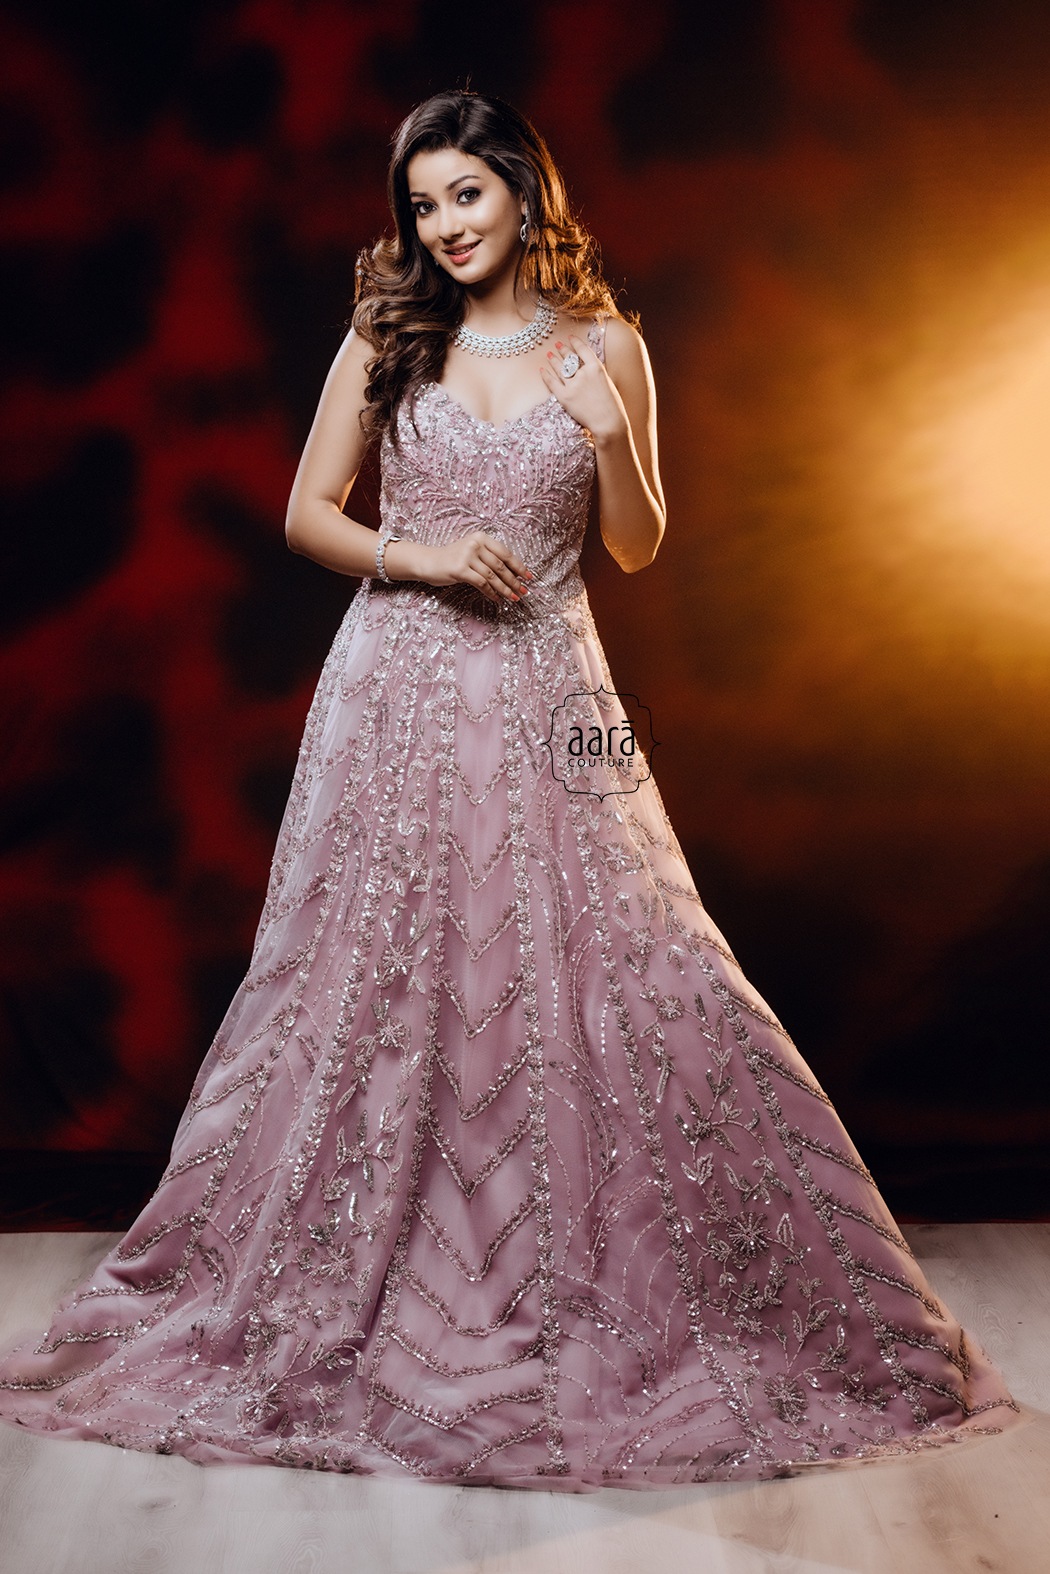 35 Latest Engagement Dresses for Women in India | Engagement dress for  bride, Engagement dresses, Indian fashion dresses